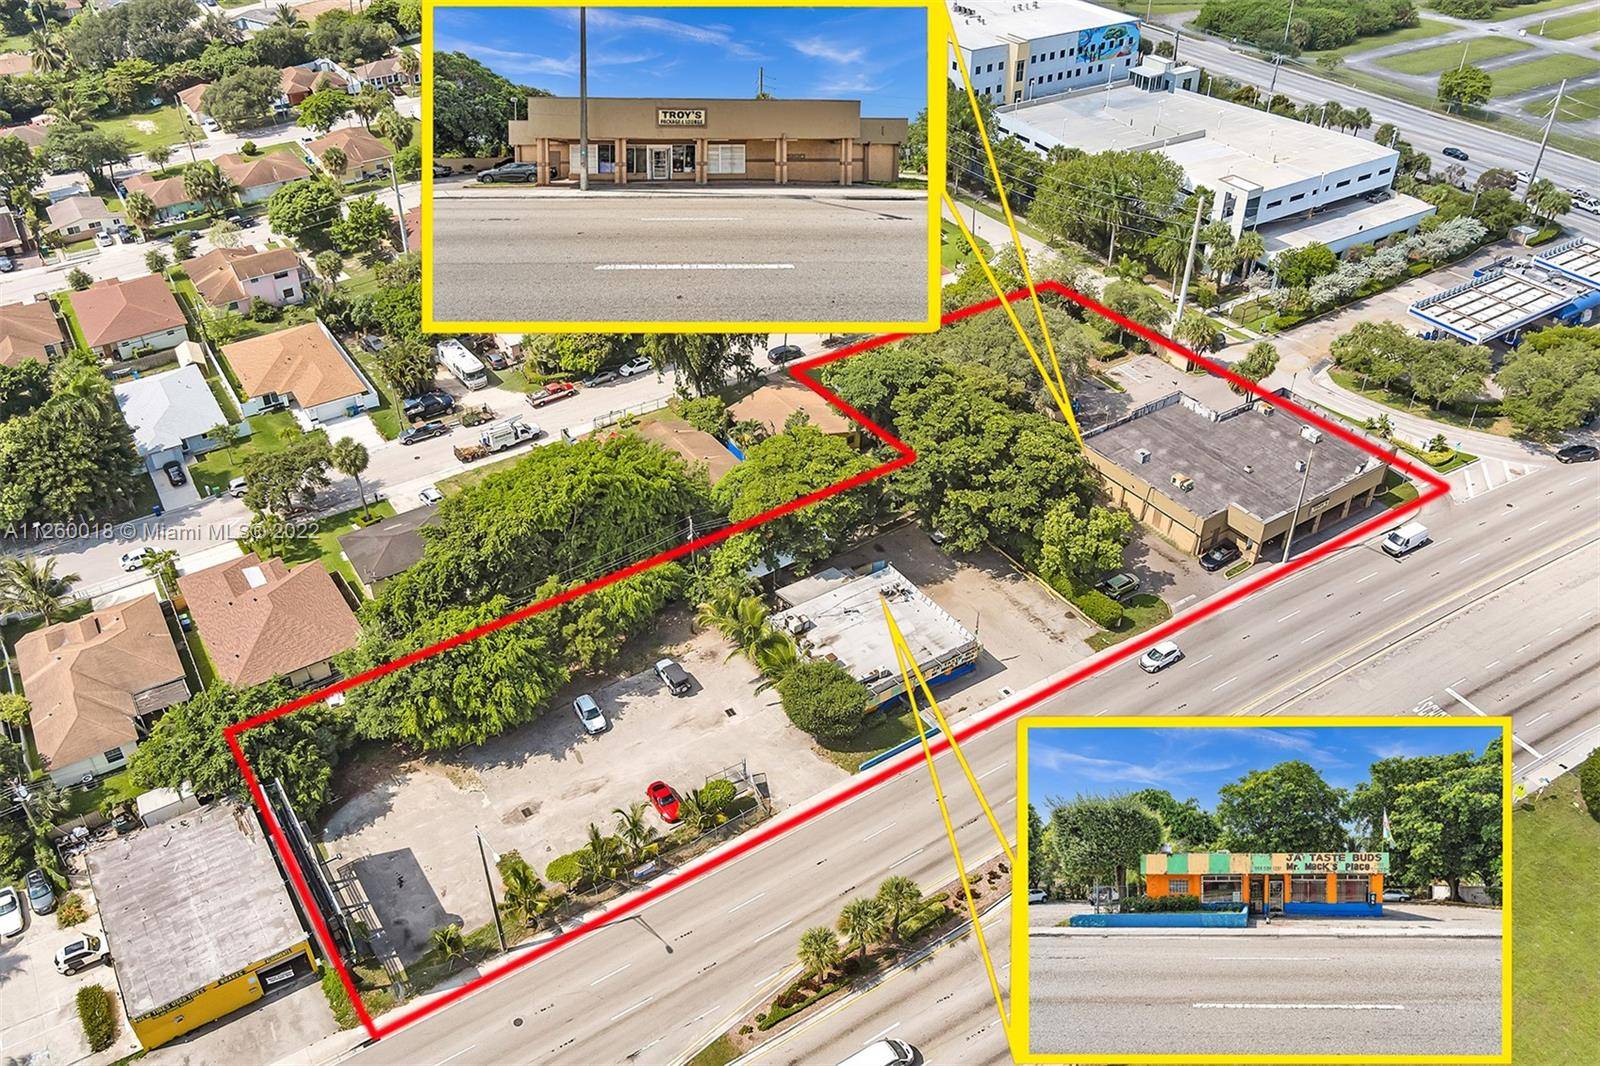 JUST REDUCED ! ! Prime commercial real estate property in Broward County less than a block away from the Sunrise Swap Shop.